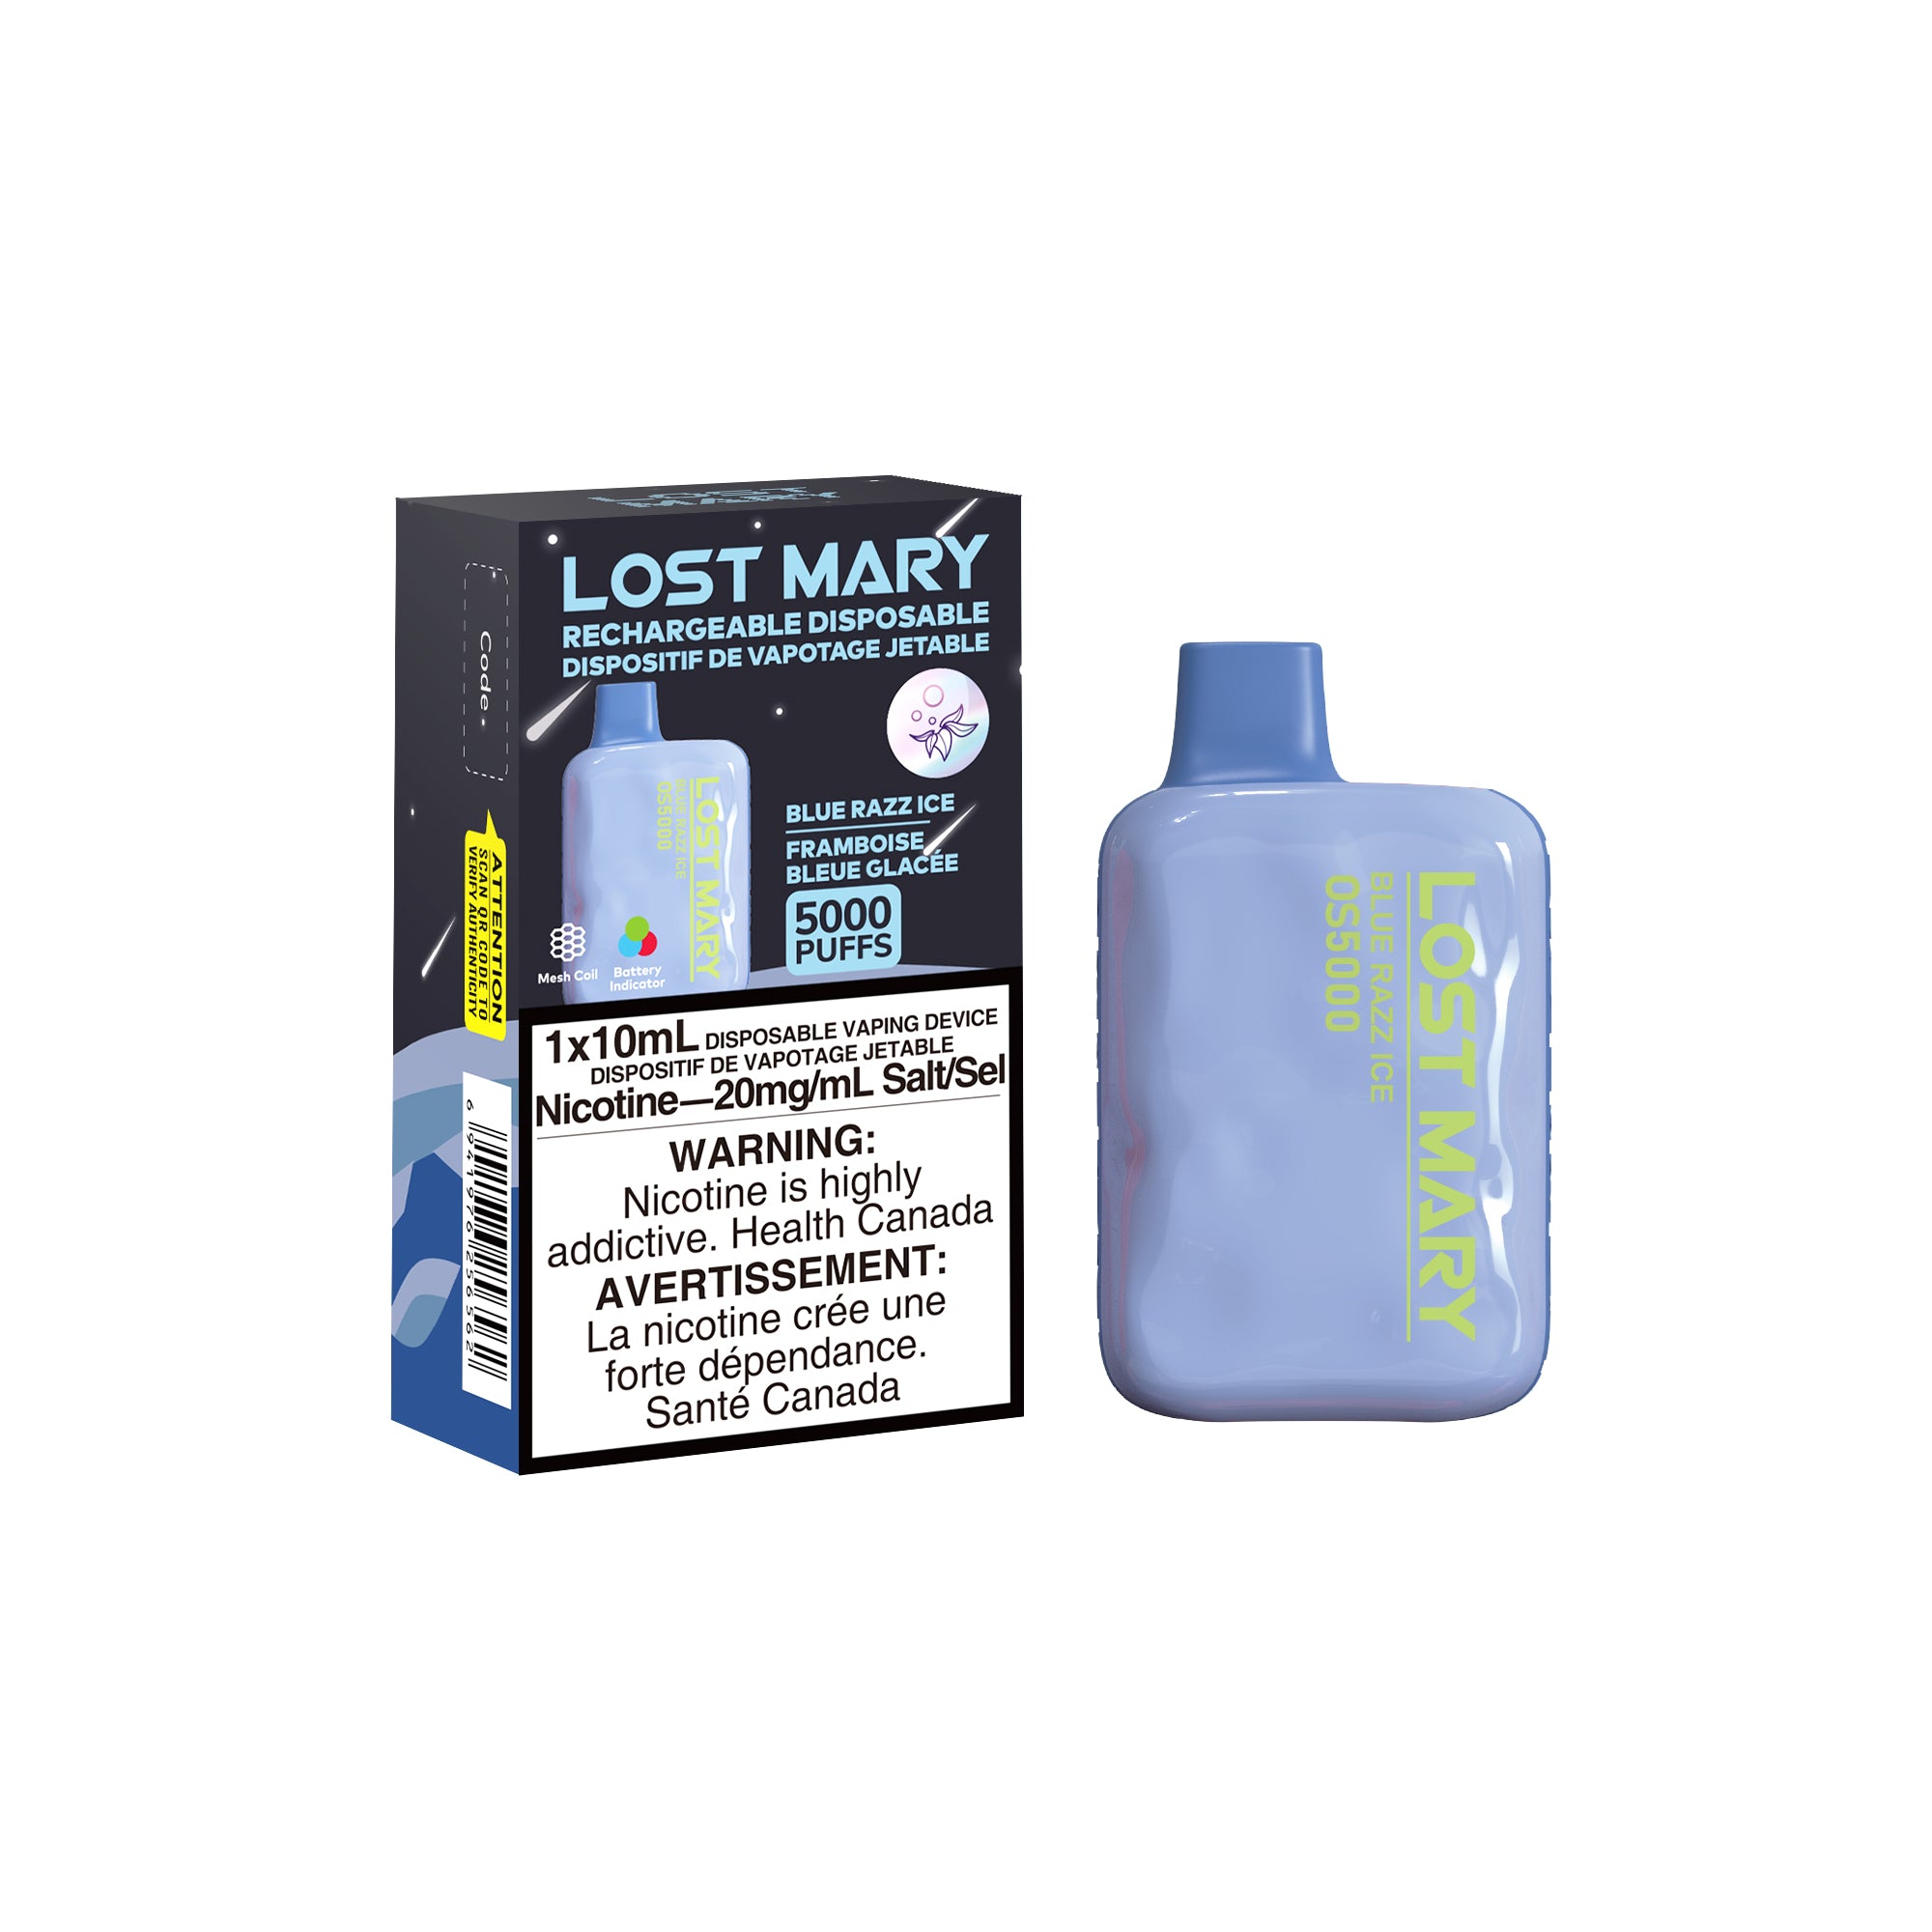 Lost Mary - 5000 puffs